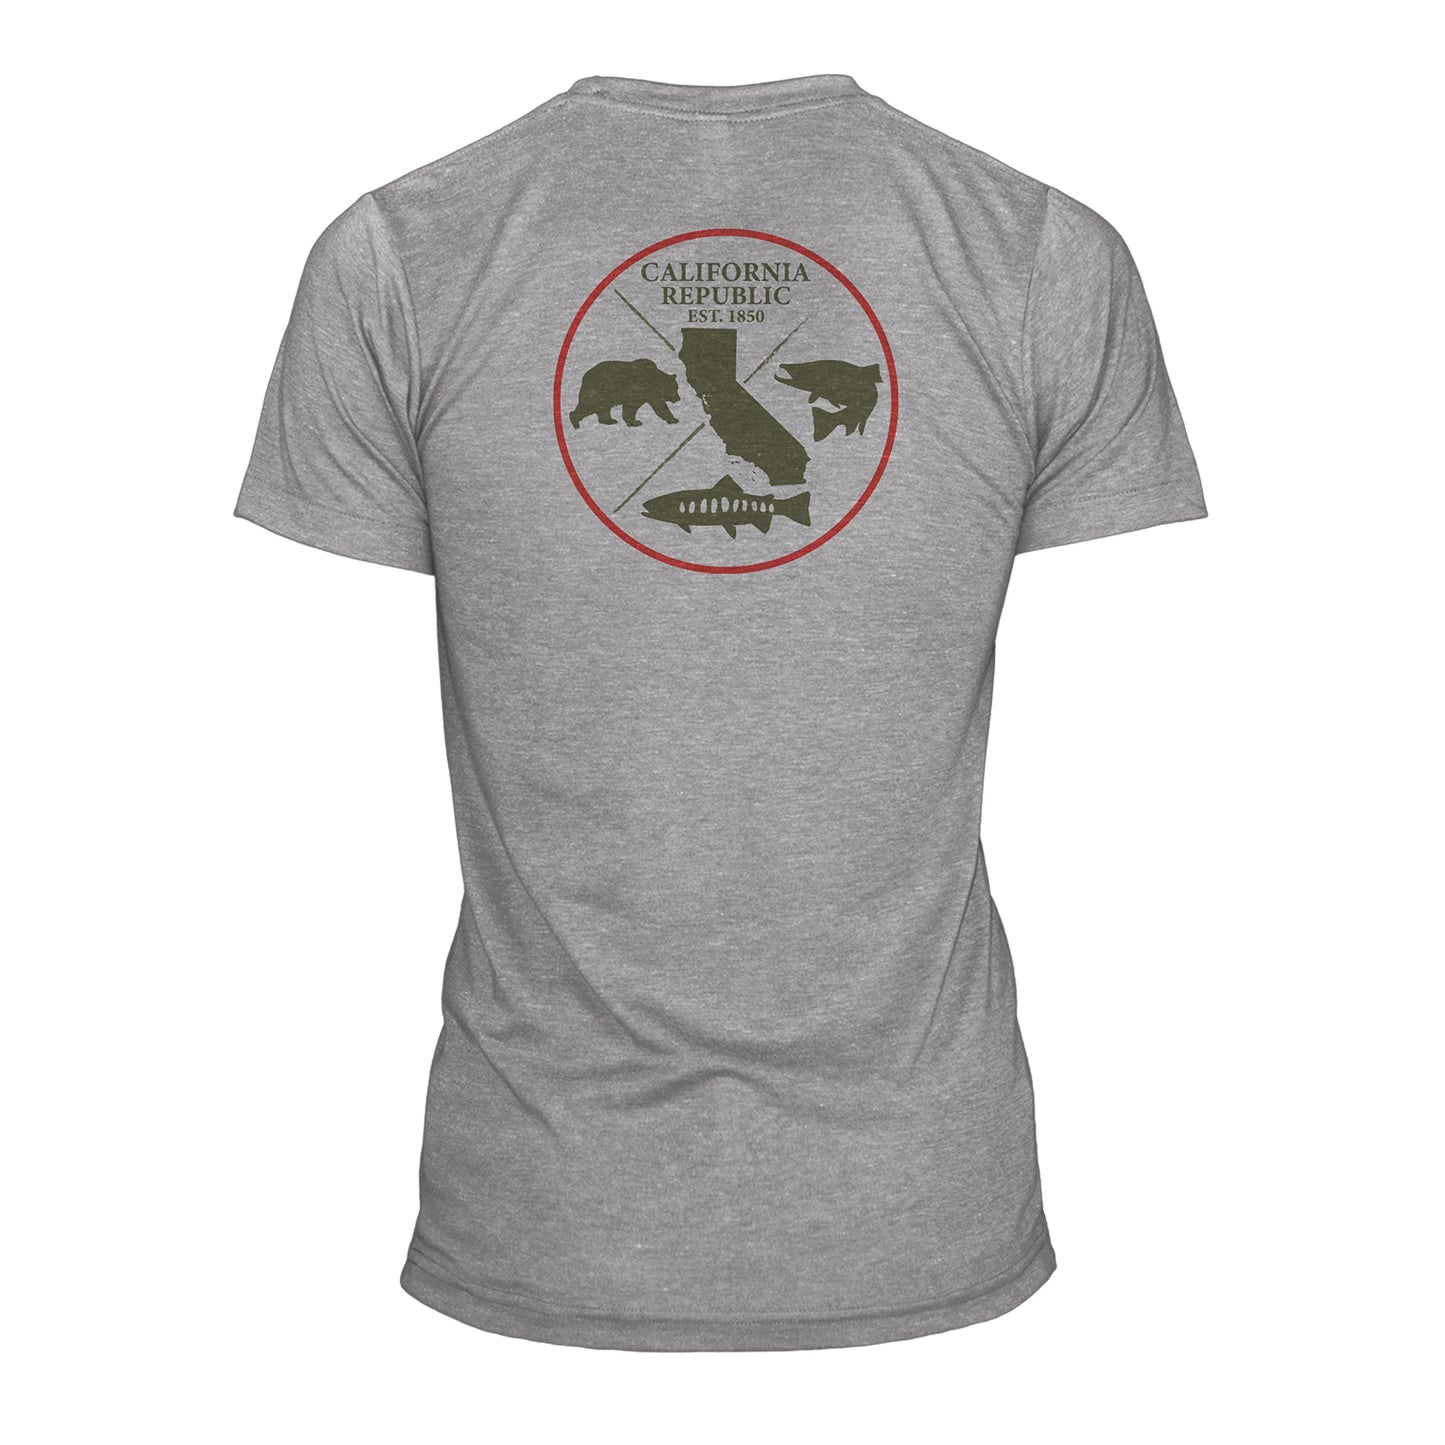 A short sleeve gray shirt has a print on the back inside a circle that shows a bear, two different trout the state of california and the words california republic est 1850